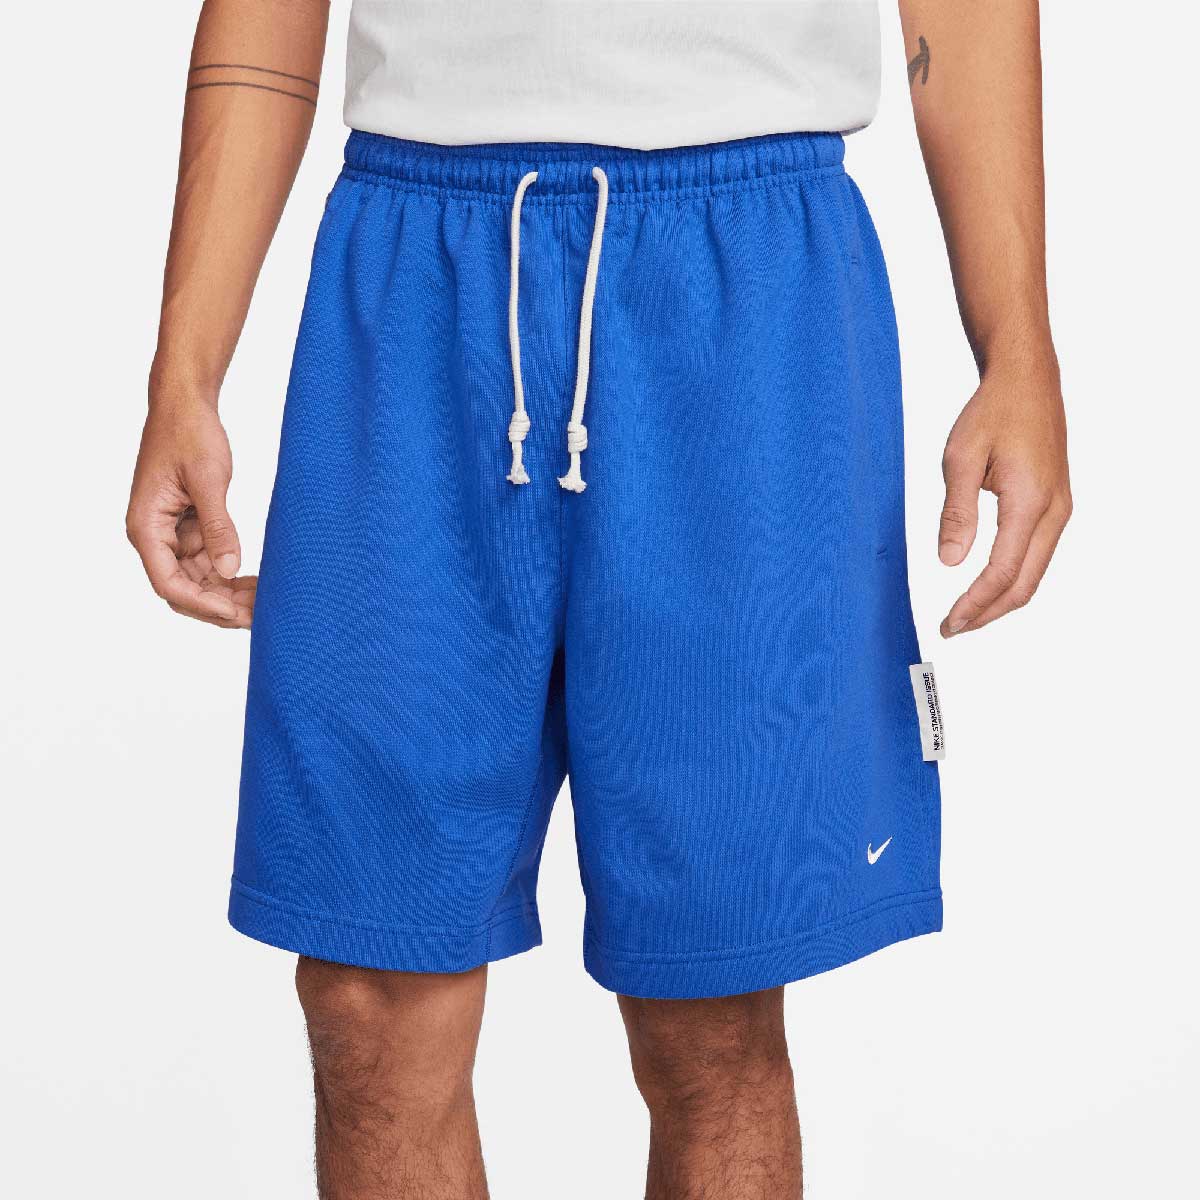 Nike Dri-Fit Si Fleece 8In Shorts, Game Royal/Pale Ivory